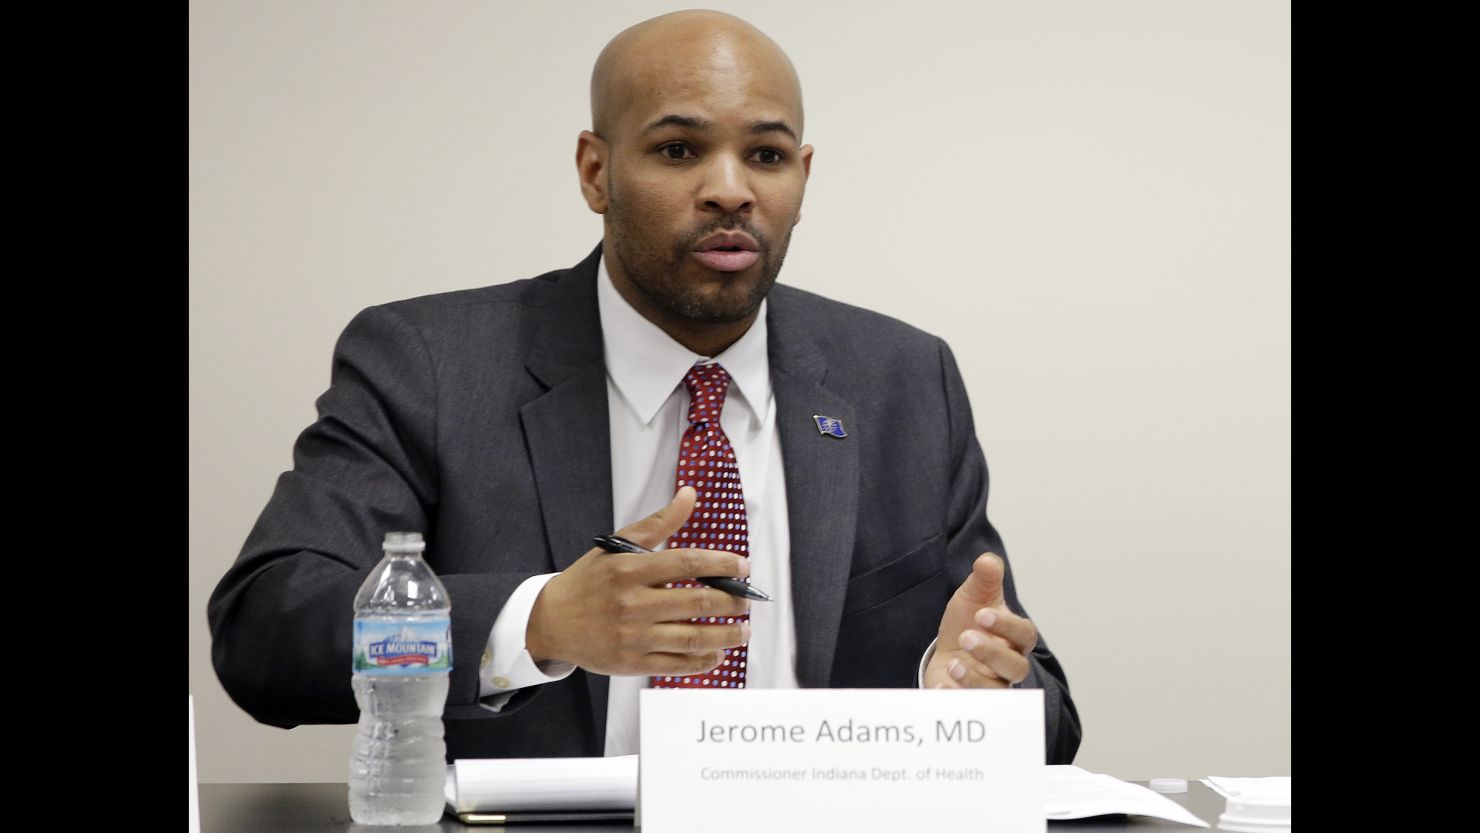 To be confirmed as surgeon general "is truly an indescribable honor," Dr. Jerome Adams tweeted.